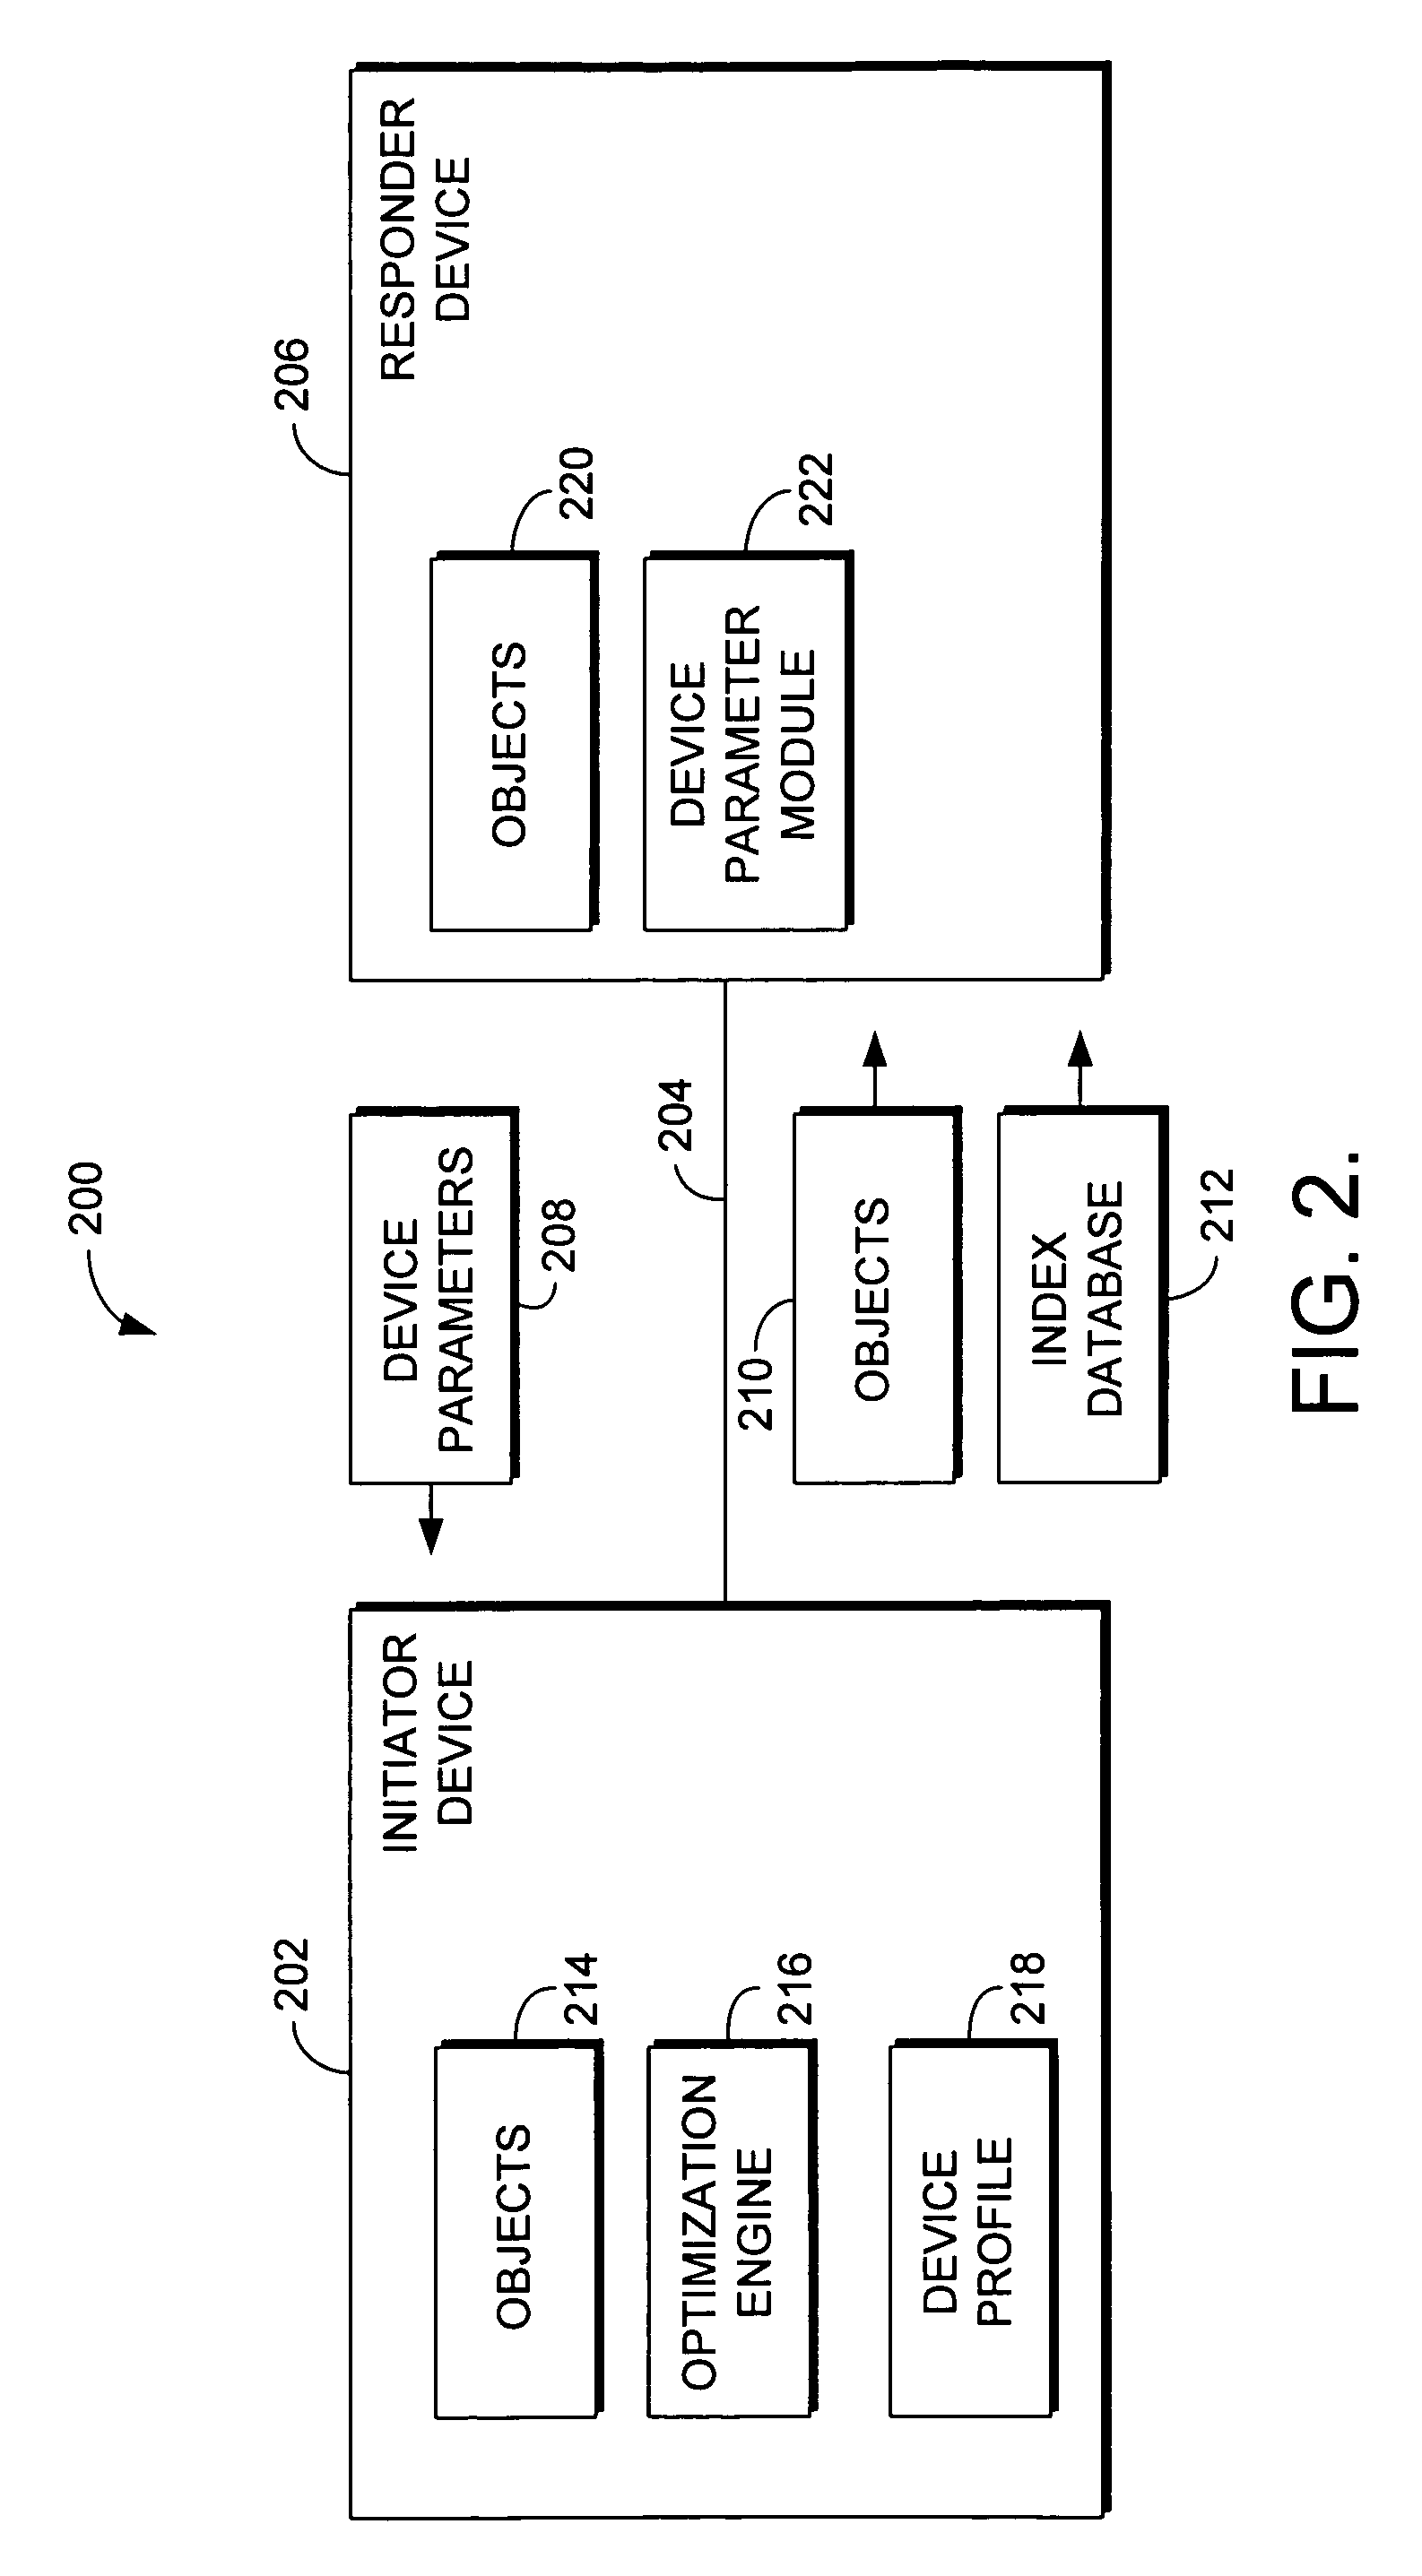 Device specific content indexing for optimized device operation